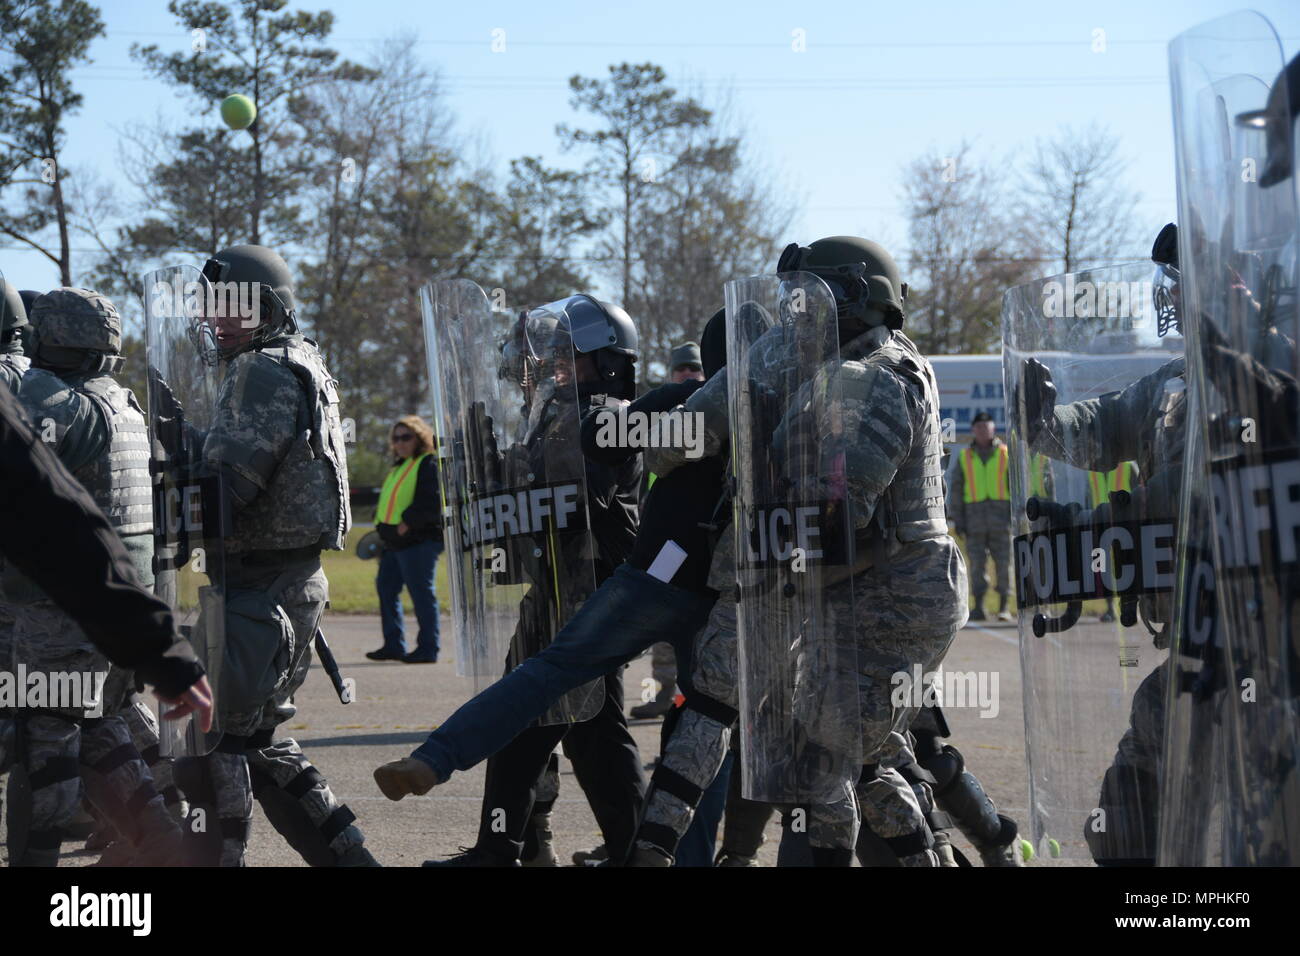 U.S. Air Force security forces Airmen from the 116th Air Control Wing and the 165th Airlift Wing, Georgia Air National Guard, along with officers from Macon-Bibb County Sheriff’s Office, rescue an acting objector from a simulated riot during Vigilant Guard 2017, a crowd-control exercise, March 15, 2017, Macon, Ga. The Airmen participated in the emergency preparedness exercise Vigilant Guard partnering with Macon-Bibb EMA and other agencies to successfully integrate crowd-control techniques during a hurricane simulation to ensure the safety of citizens during possible natural disasters or catas Stock Photo